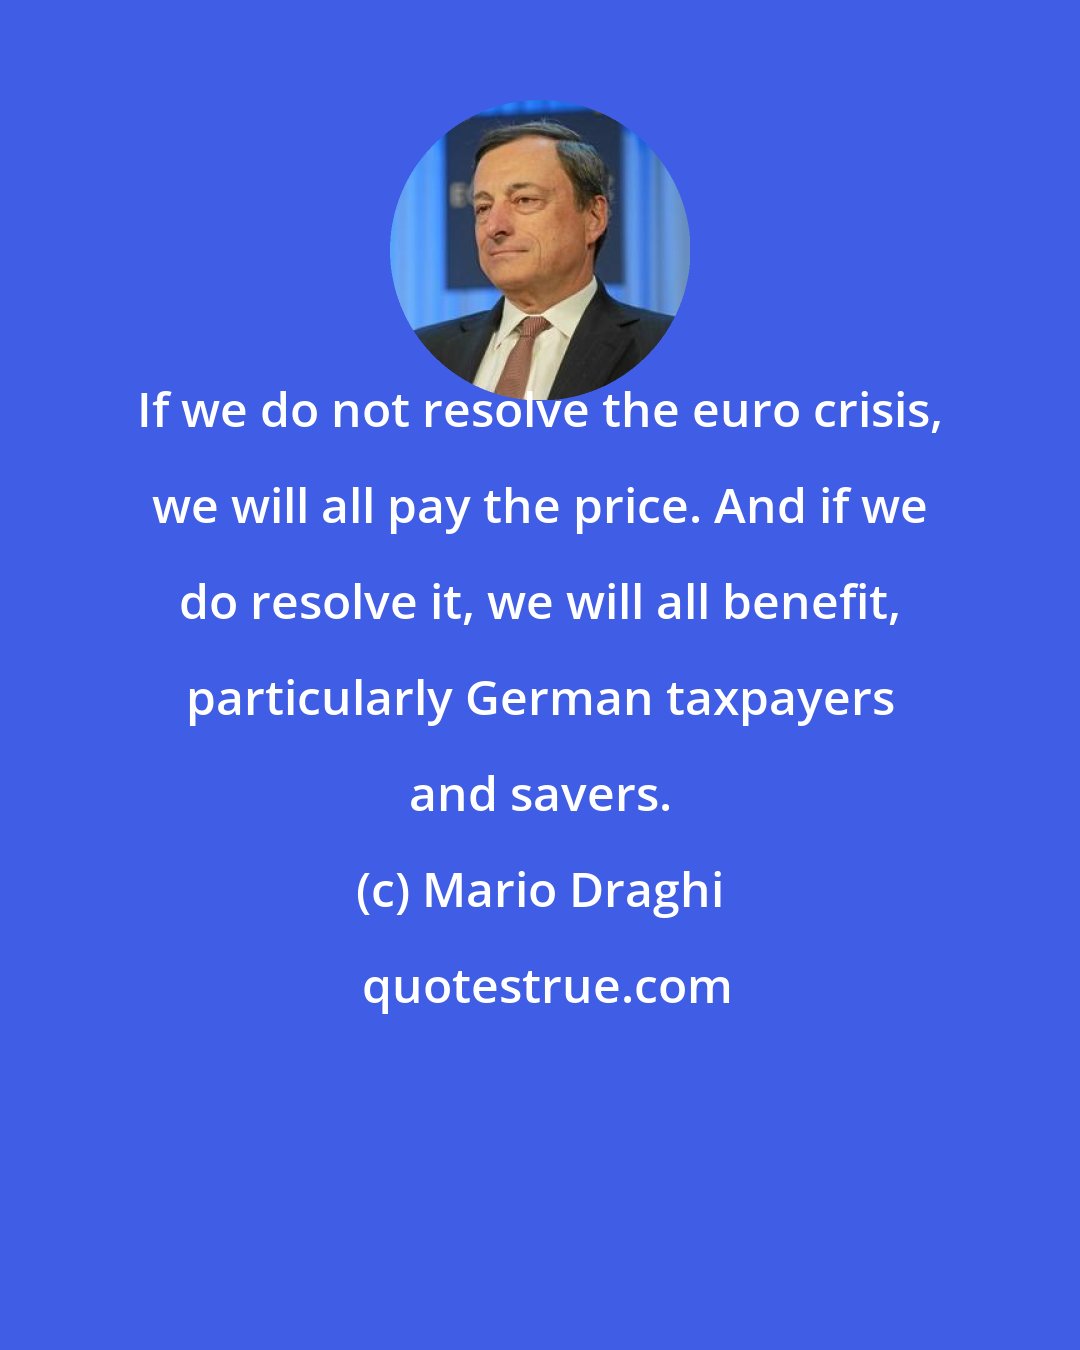 Mario Draghi: If we do not resolve the euro crisis, we will all pay the price. And if we do resolve it, we will all benefit, particularly German taxpayers and savers.